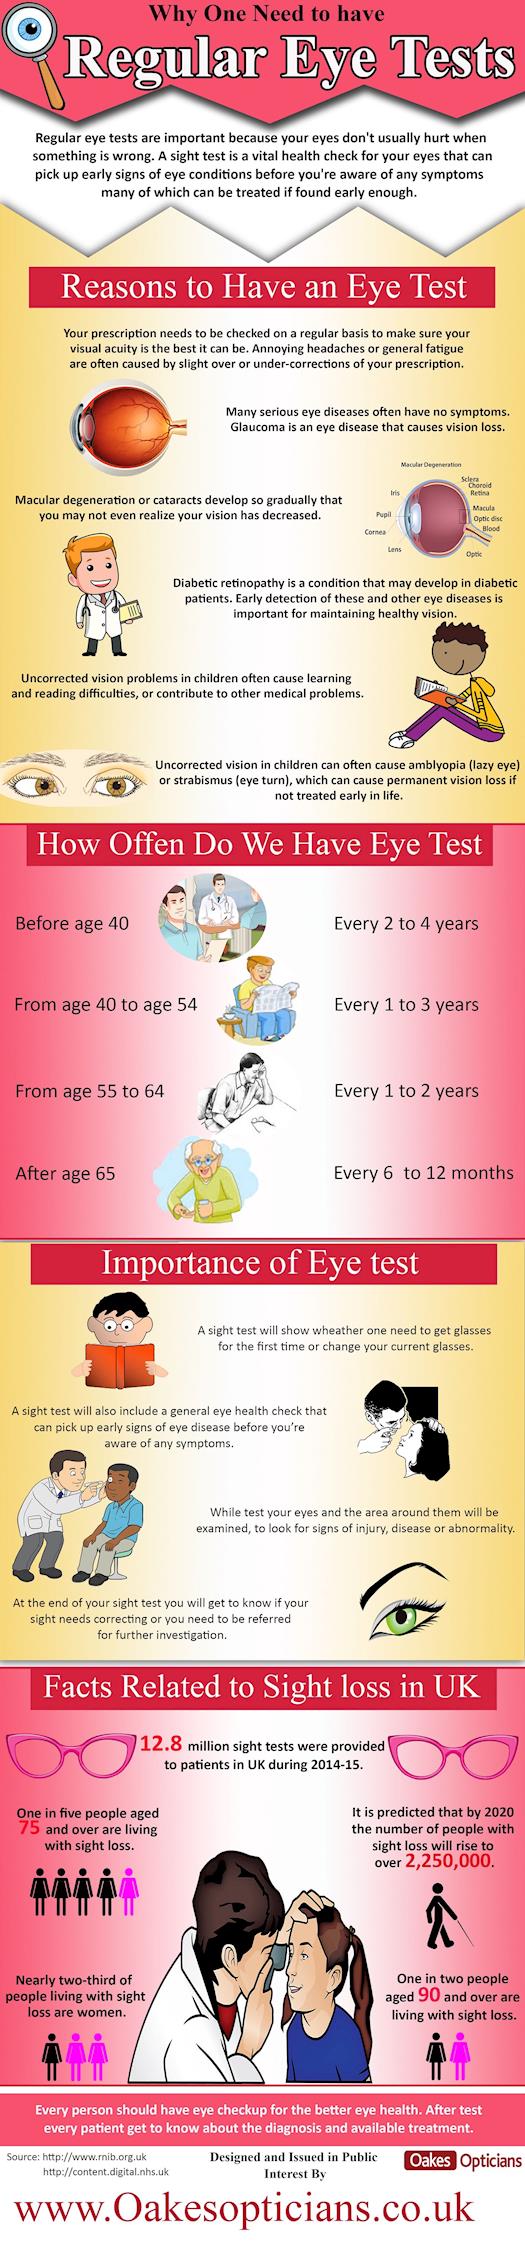 Why One Need to Have Regular Eye Tests